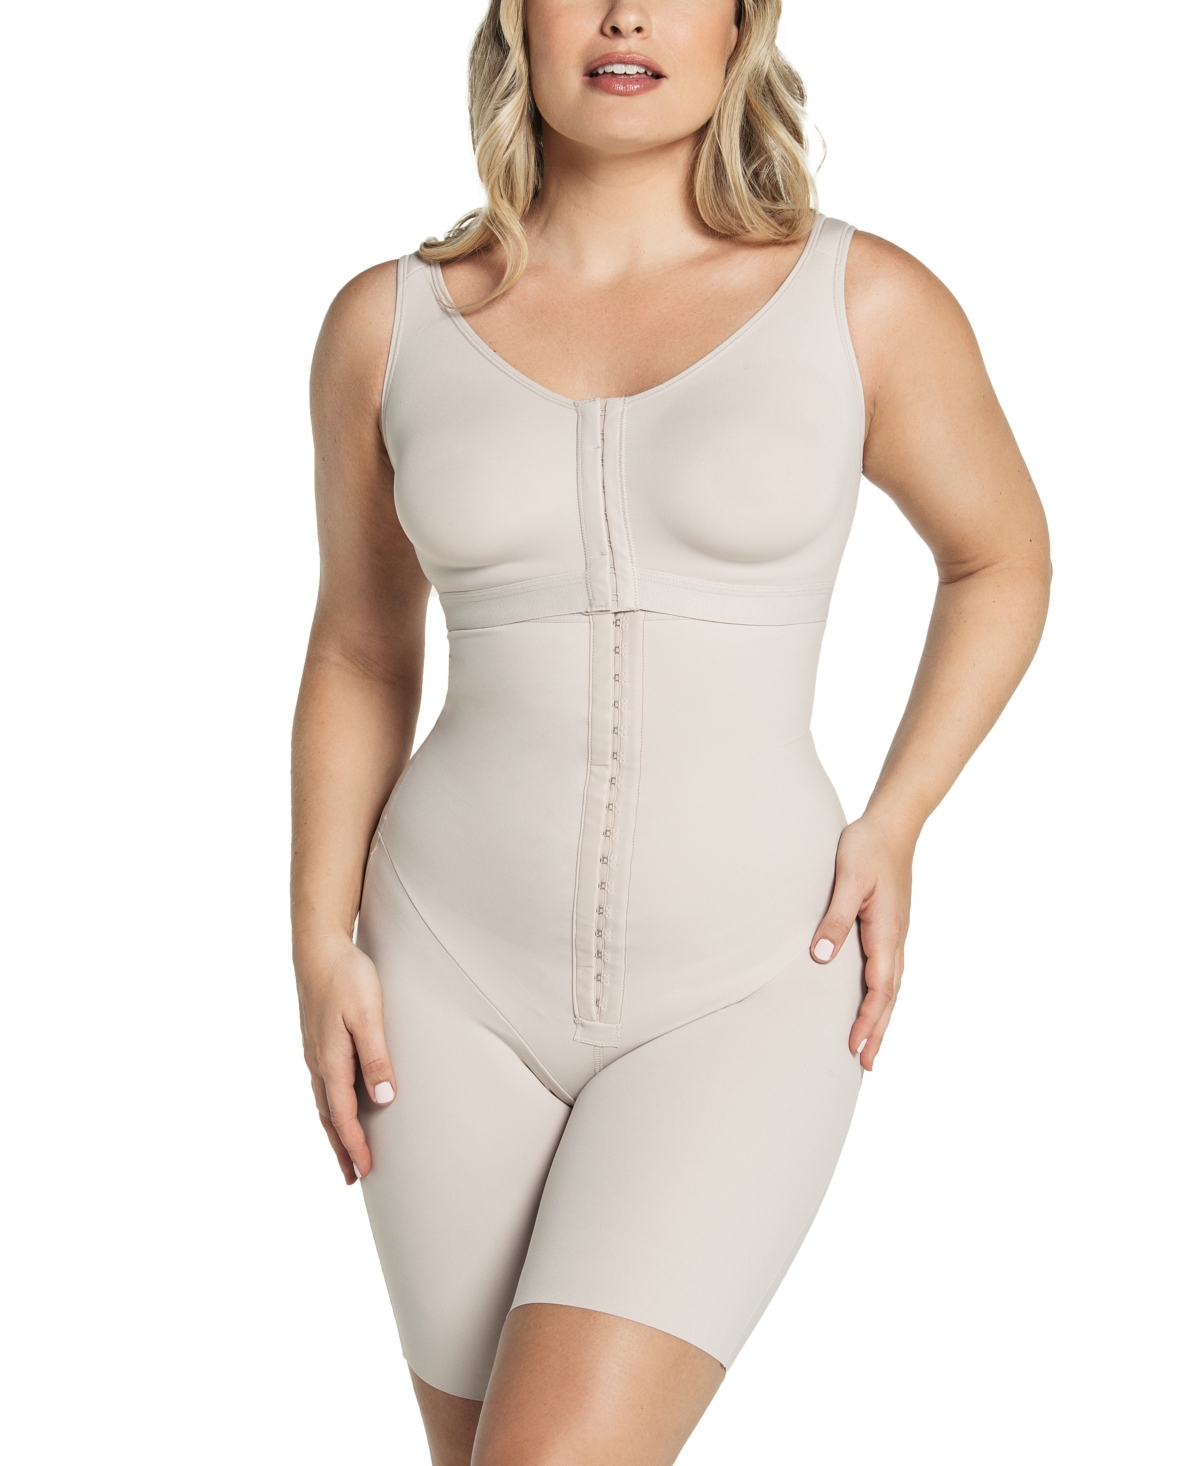 Leonisa Women's Sculpting Body Shaper with Built in Back Support Bra, 18520